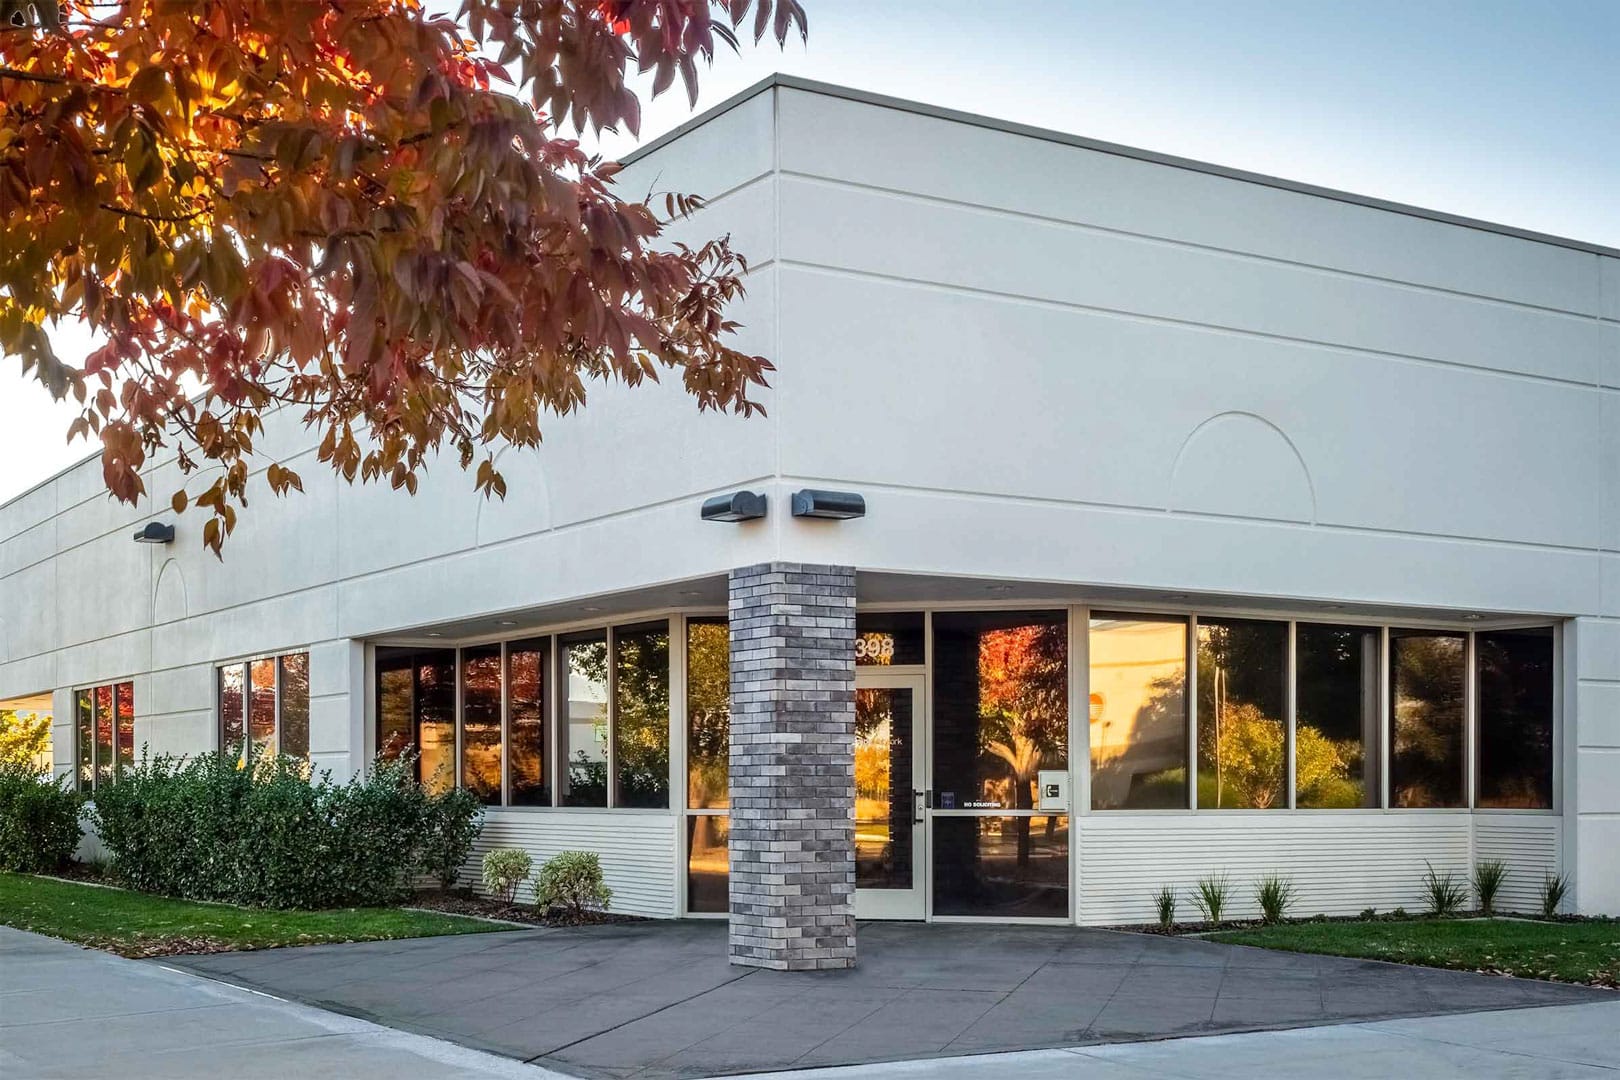 Cottonwood Plaza is a Flex Property at 350 Mitchell St. in Boise, Idaho